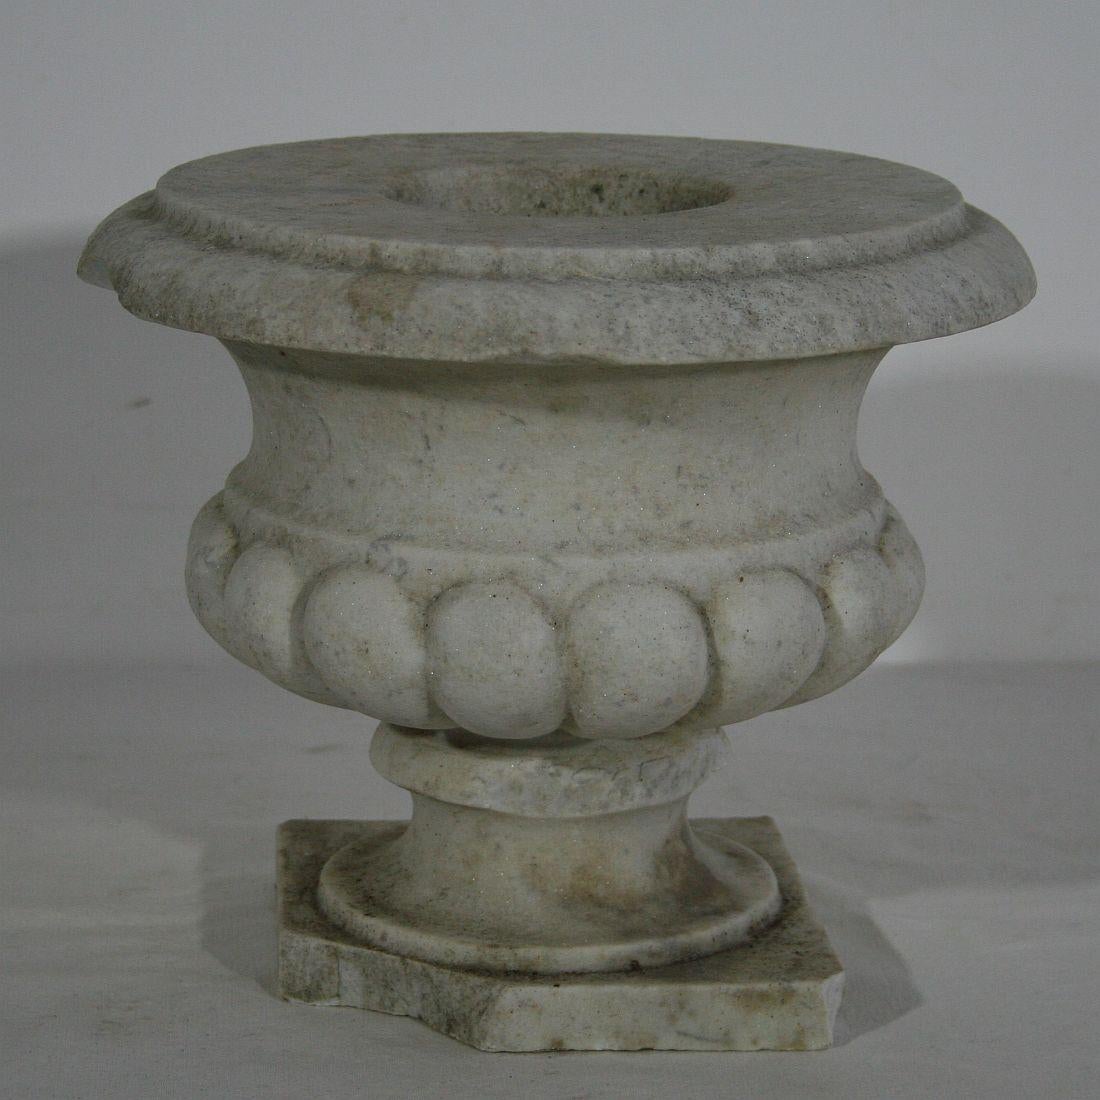 Rare white marble vase garden urn. Beautiful decorative centerpiece.
England, circa 1800-1850.
Weathered, some losses.